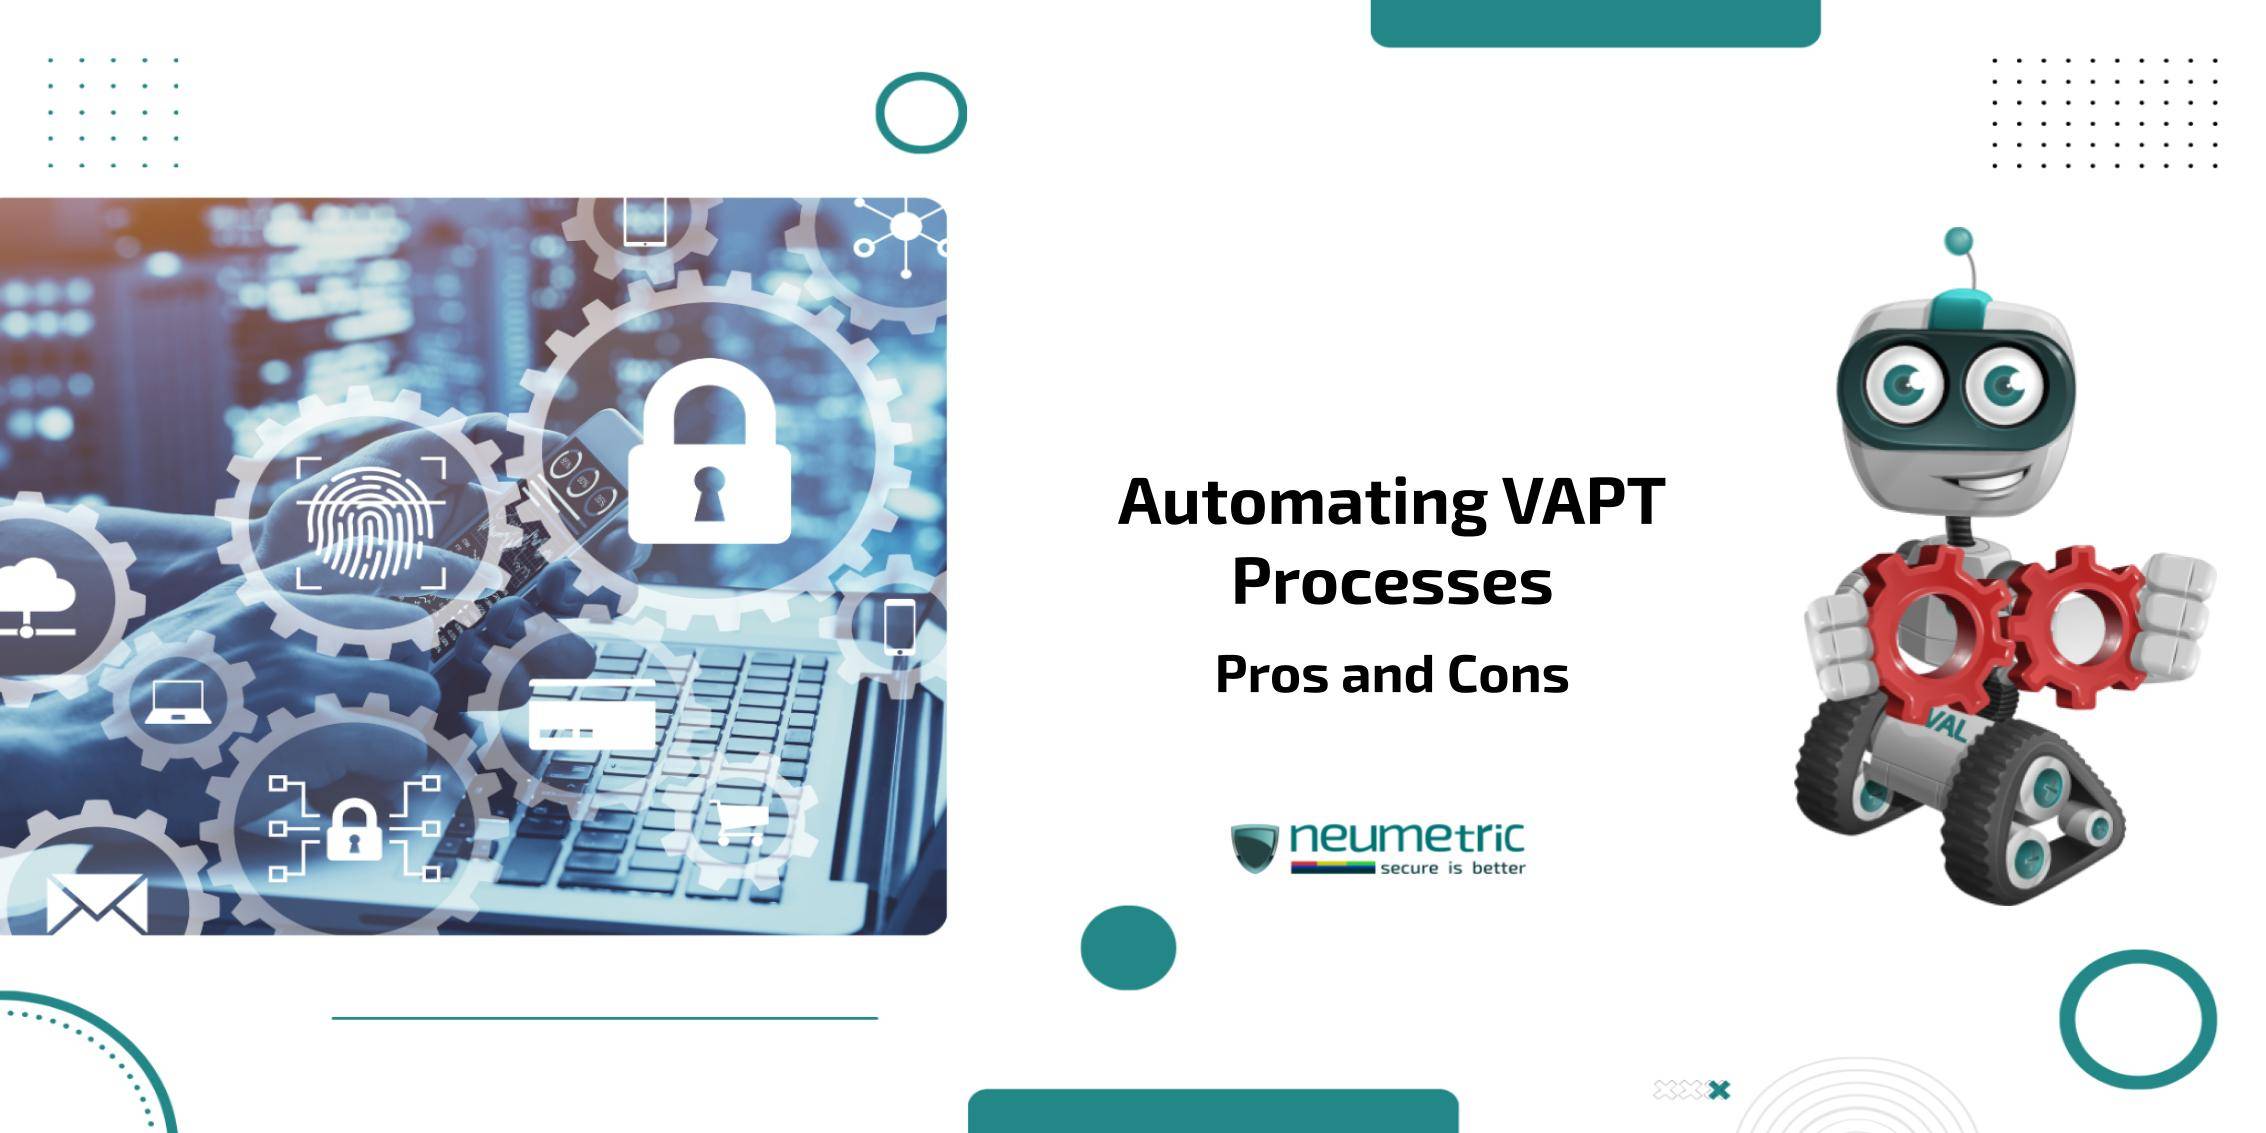 Automating VAPT Processes: Pros & Cons